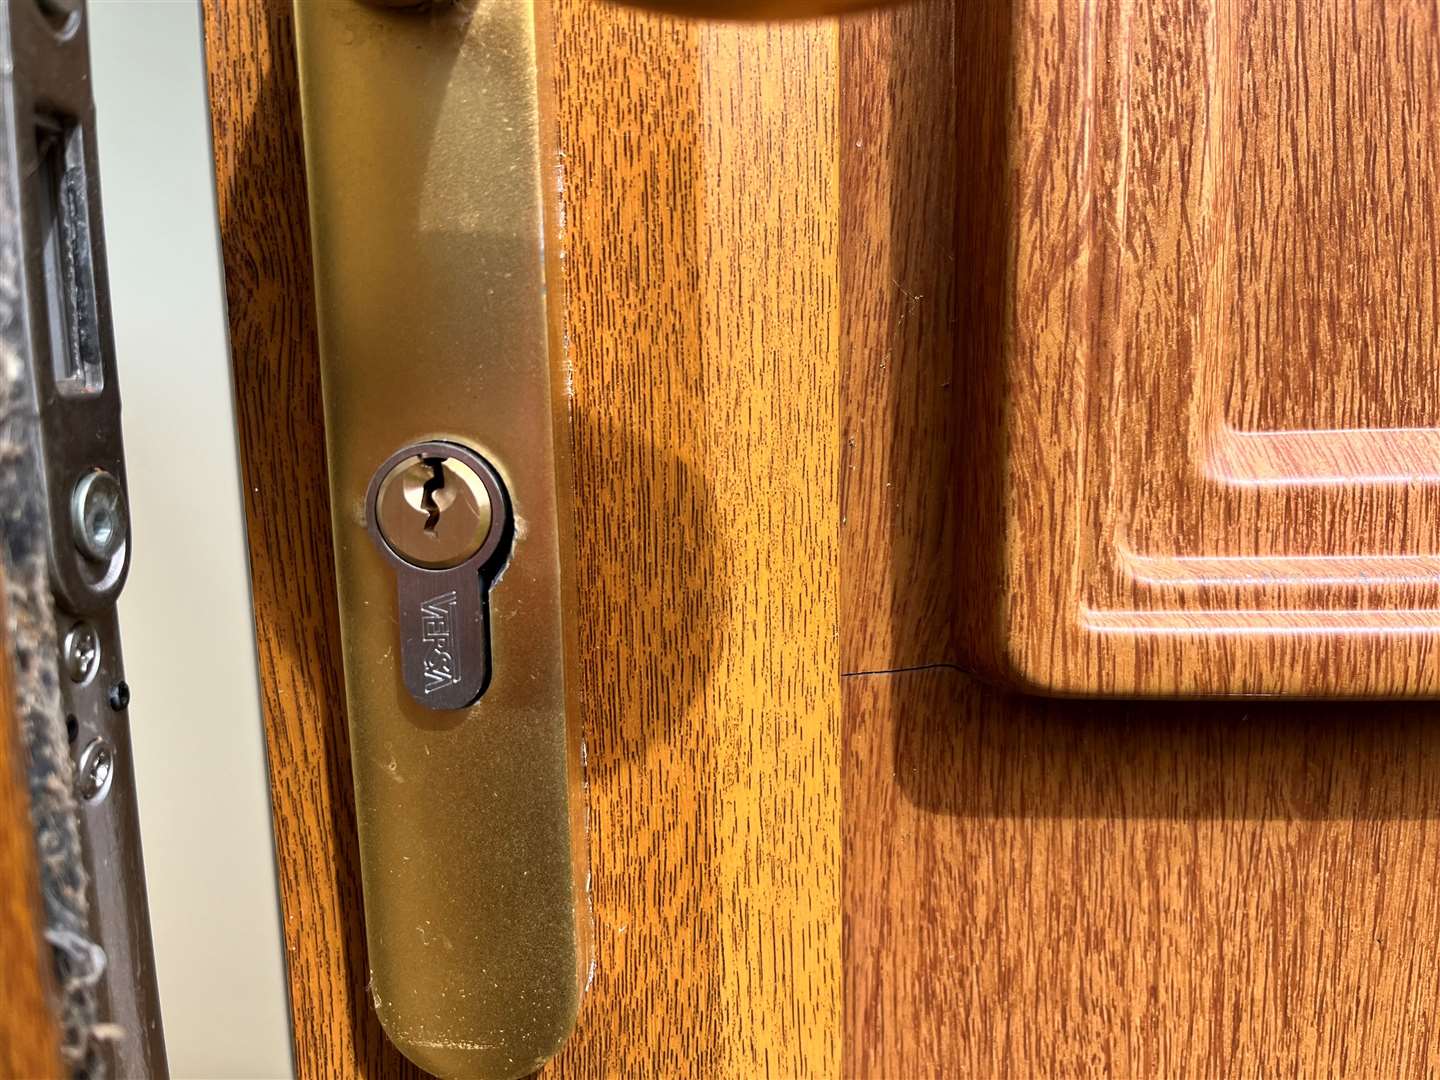 The new cylinder lock does not even sit flush in the door handle fitting